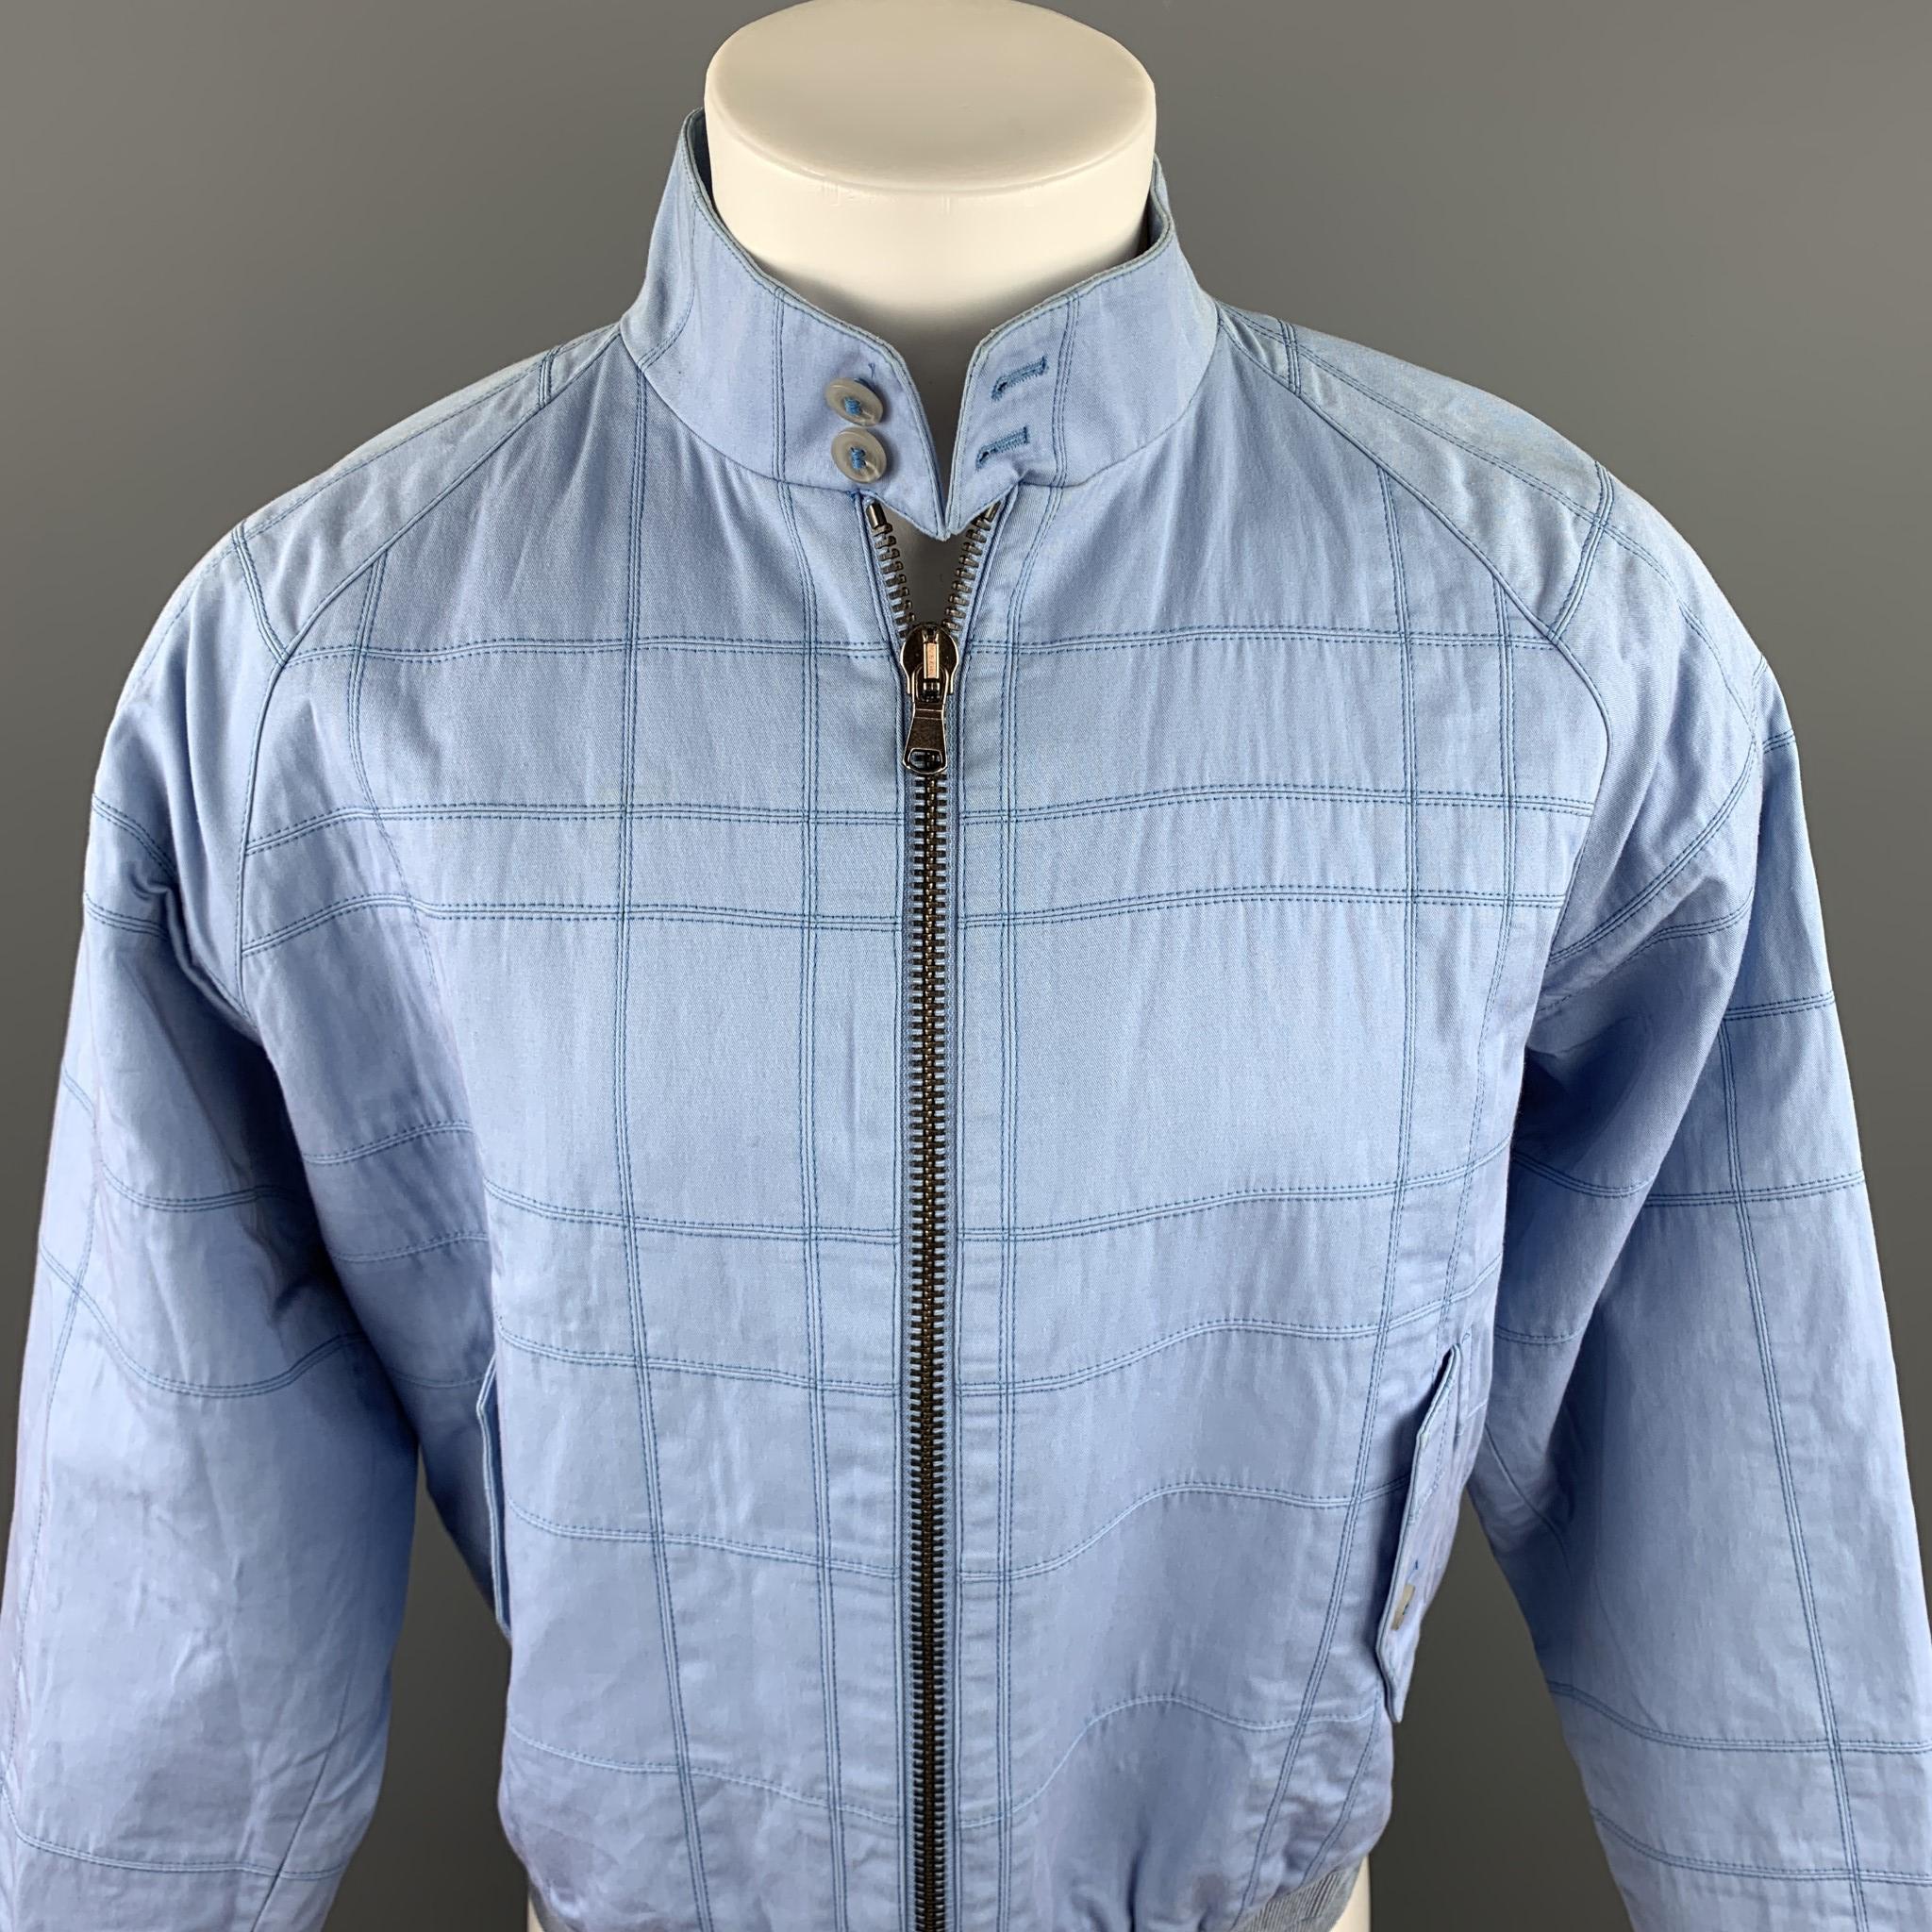 CALVIN KLEIN COLLECTION jacket comes in a light blue stitched cotton / acrylic featuring a buttoned collar, flap pockets, and a zip up closure. Made in Italy.

Very Good Pre-Owned Condition.
Marked: 48/38

Measurements:

Shoulder: 17 in. 
Chest: 44